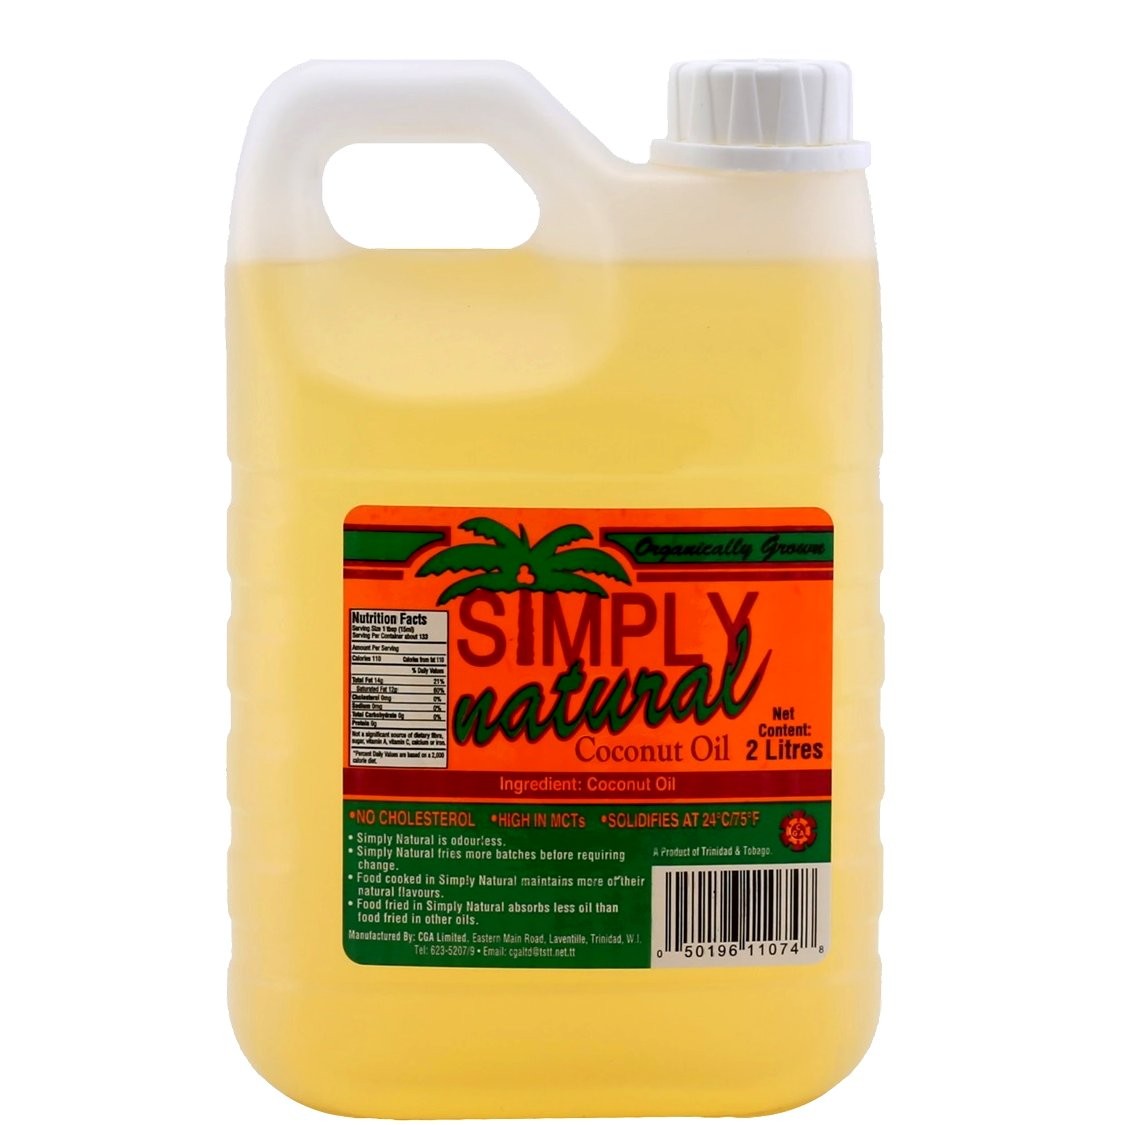 SIMPLY NATURAL COCONUT OIL 2L